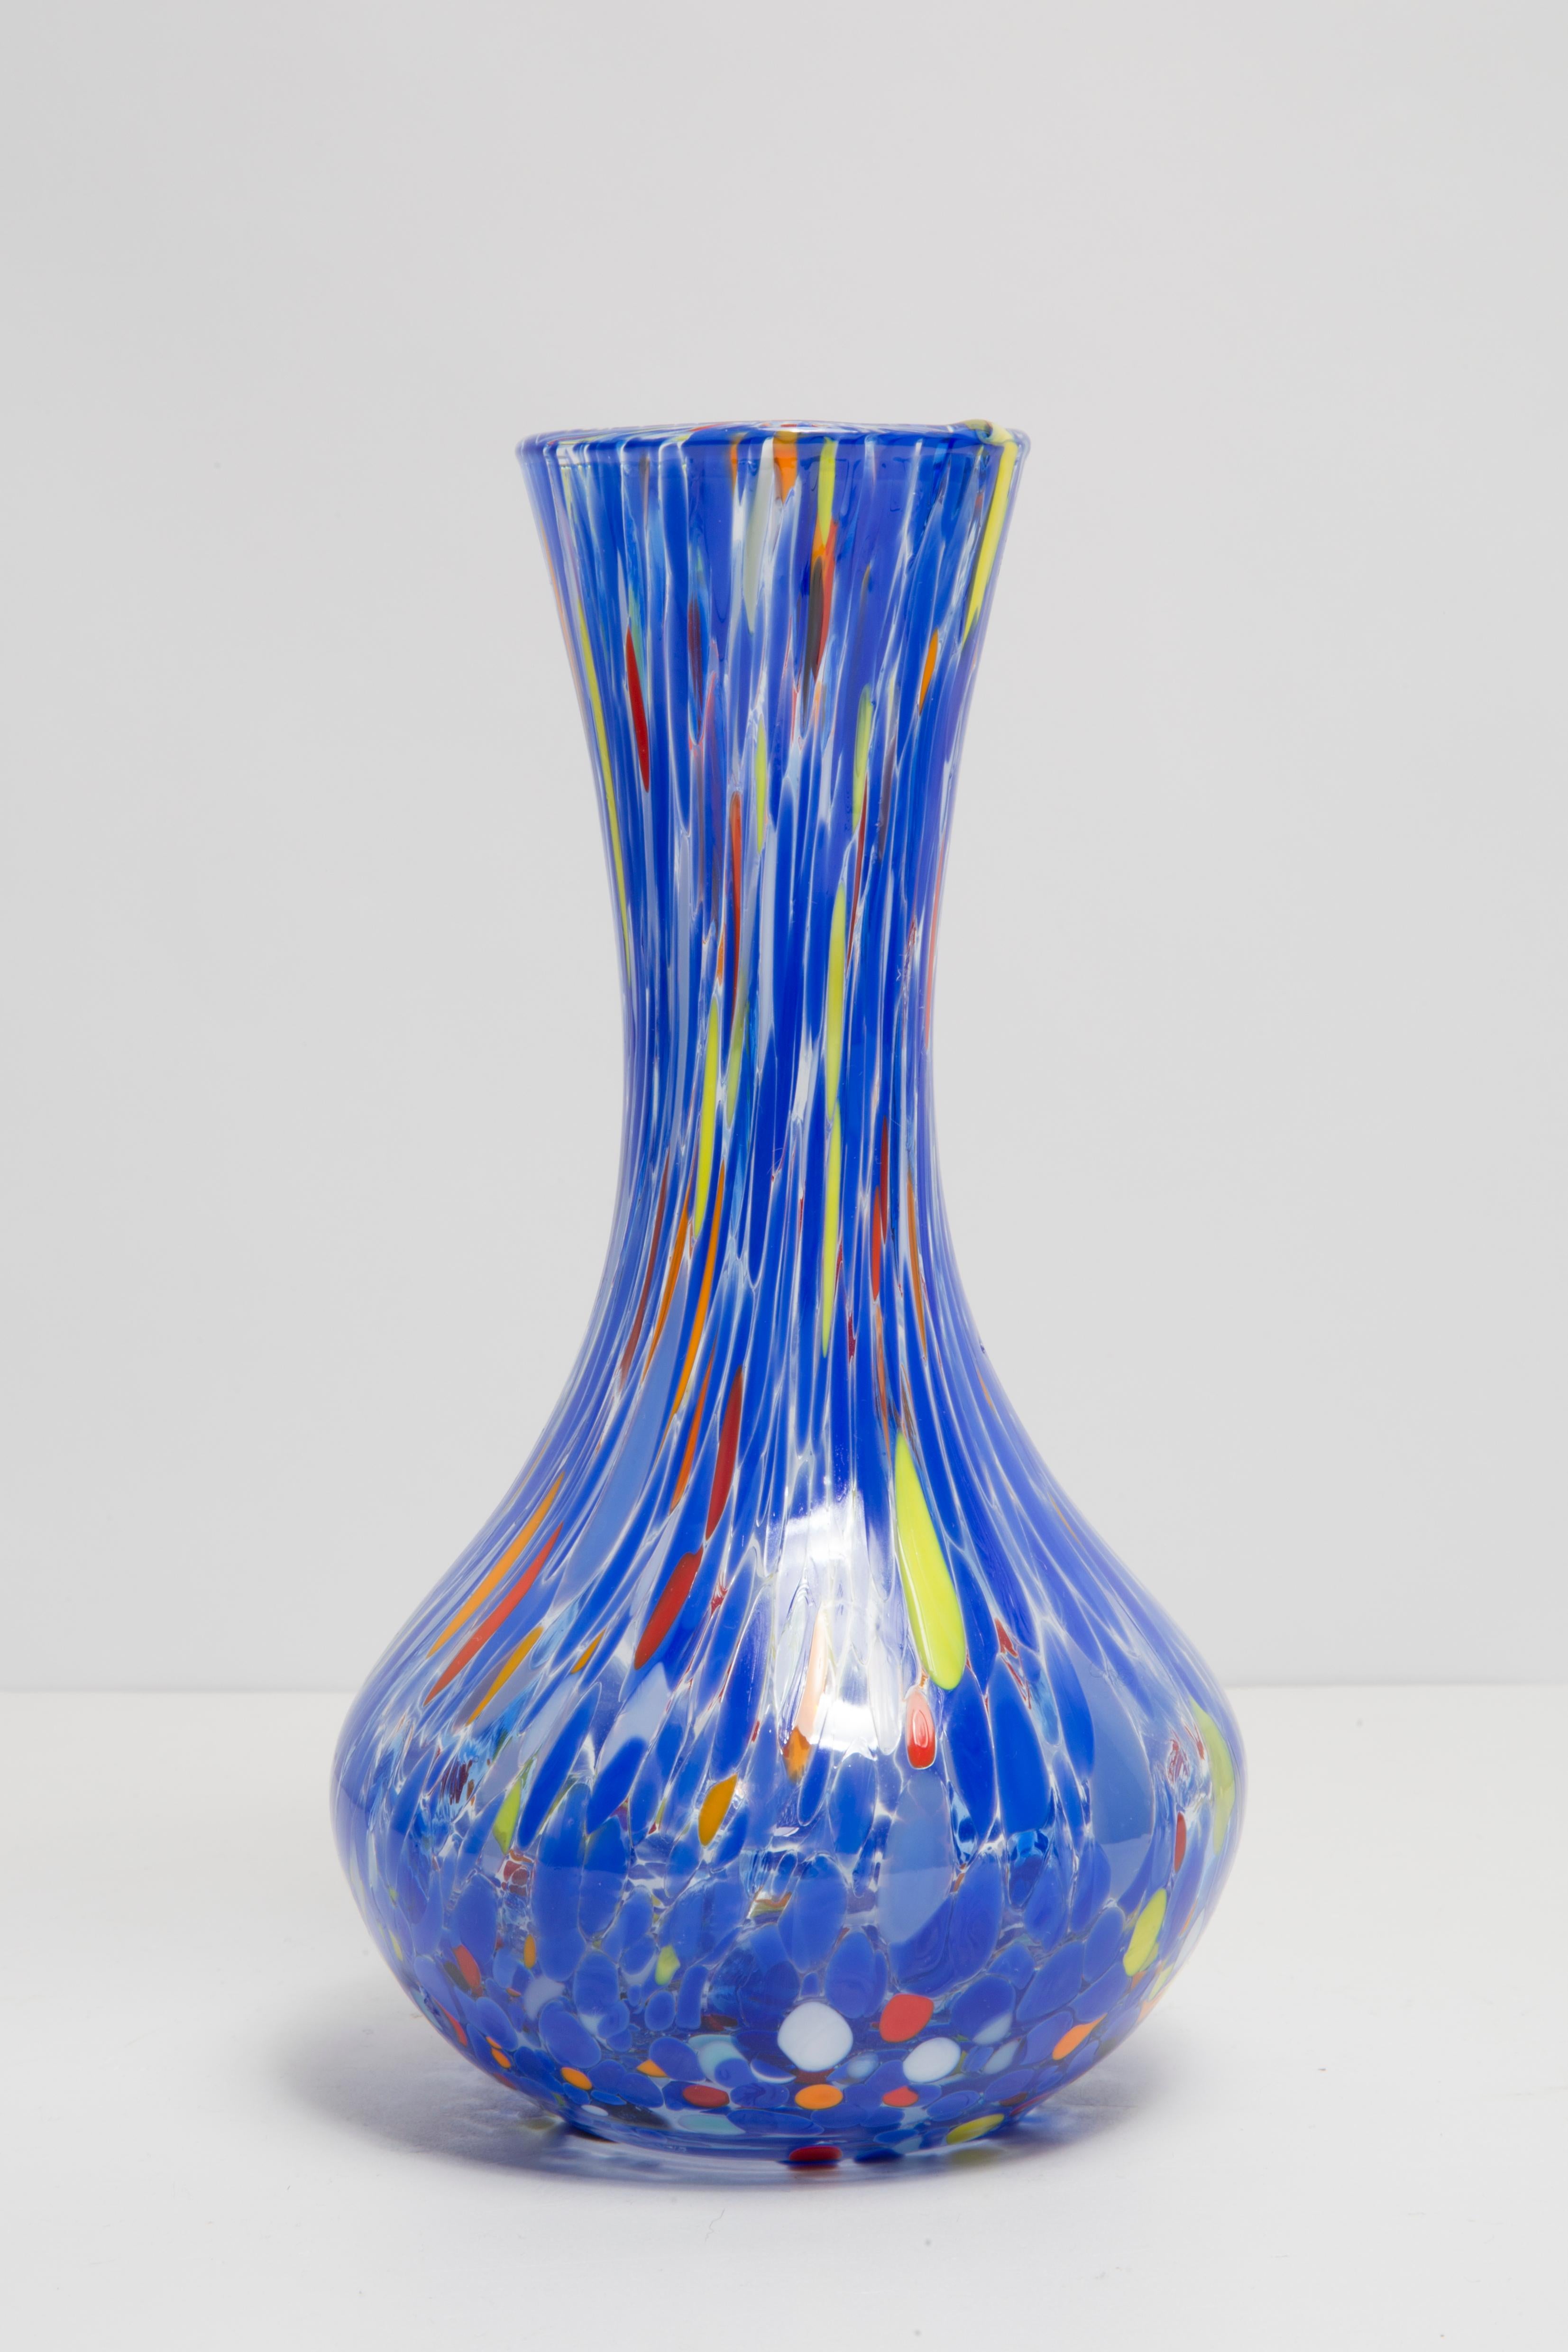 Vintage glass in very good condition. The vase looks like it has just been taken out of the box. No jags, defects etc. Only one unique piece. Murano glass.